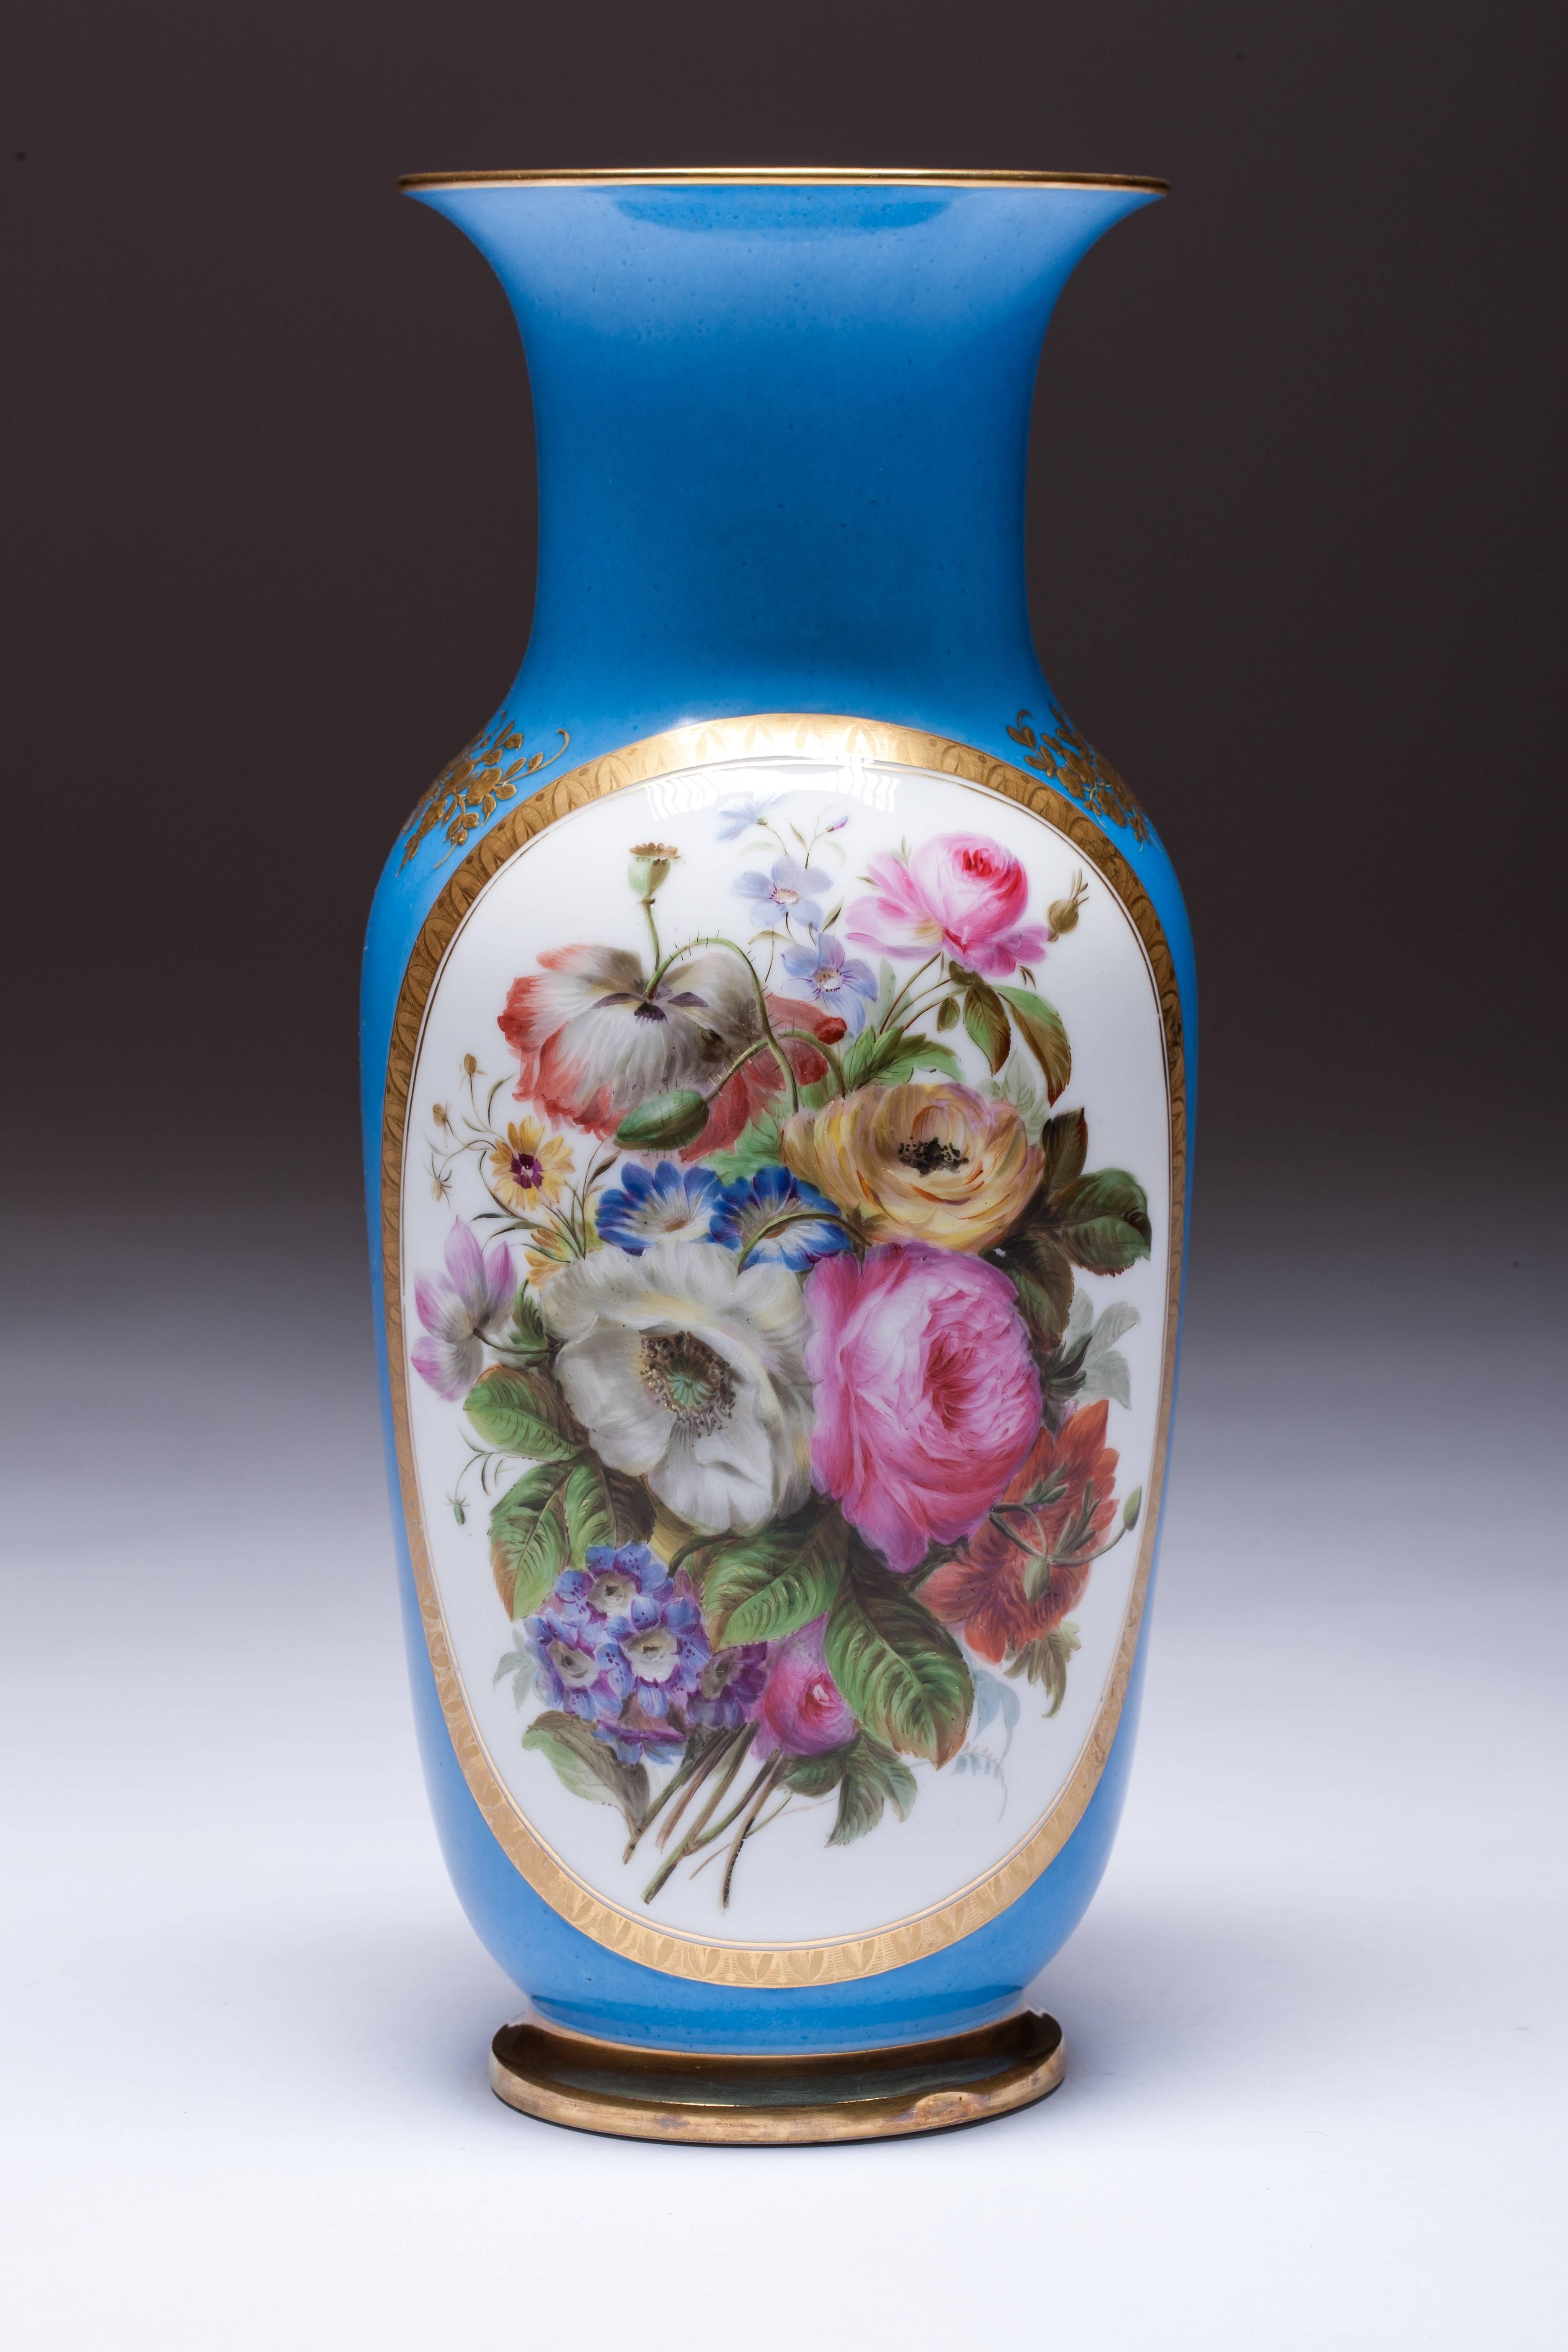 Beautiful big hand-painted Old Paris Porcelain vase. Decorated with lush floral bouquets, enclosed on a blue ground with golden tape. Reverse side of the vase is decorated embossed golden flower surface.

Old Paris porcelain or as the French say